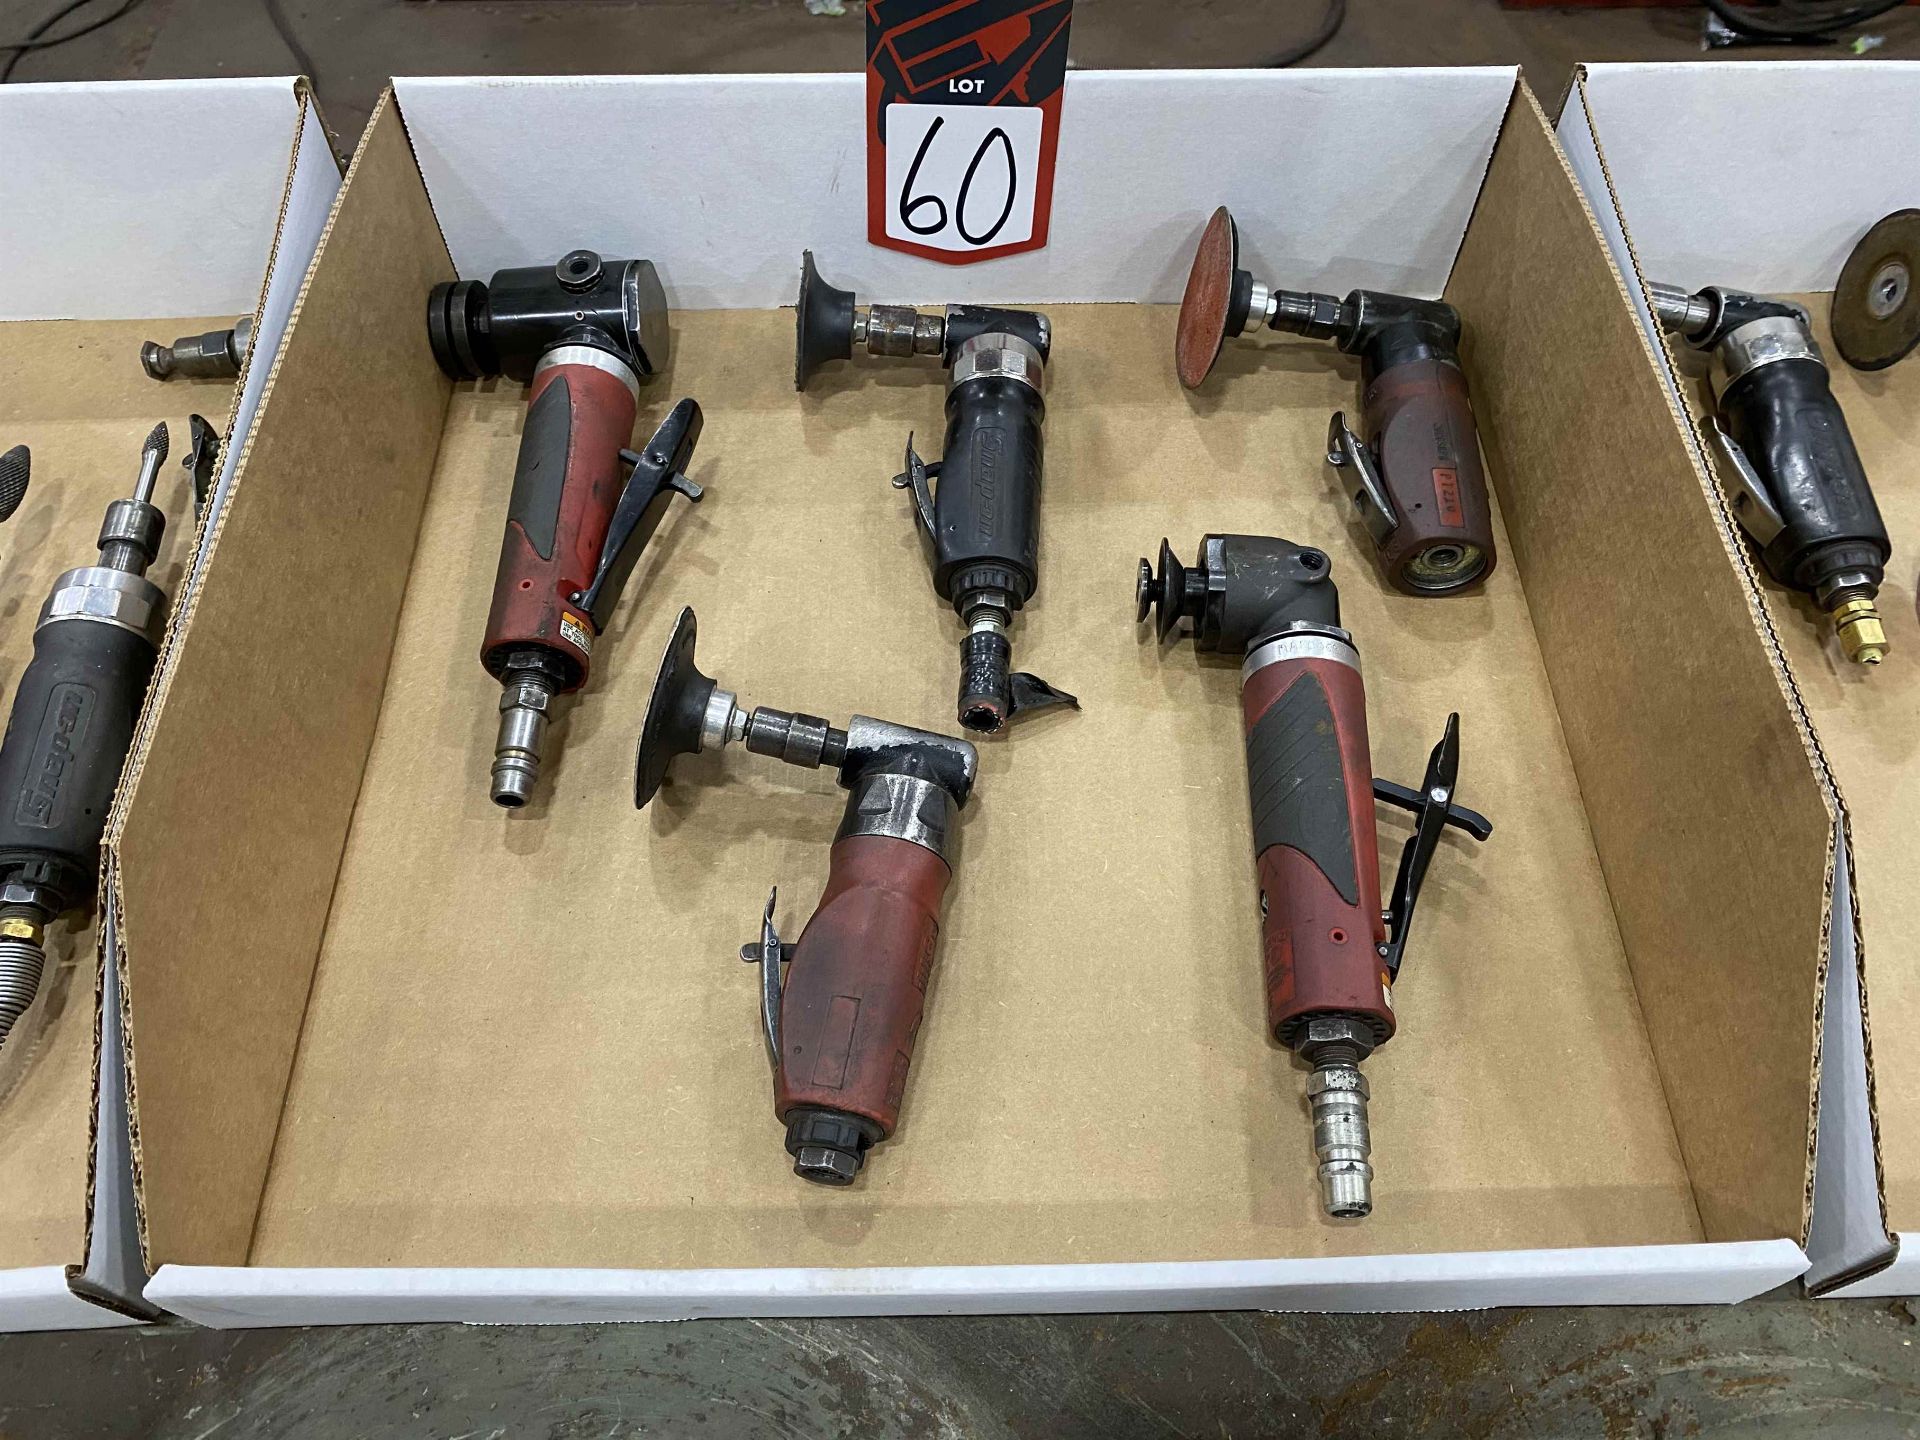 Lot of Pneumatic Right Angle Grinders